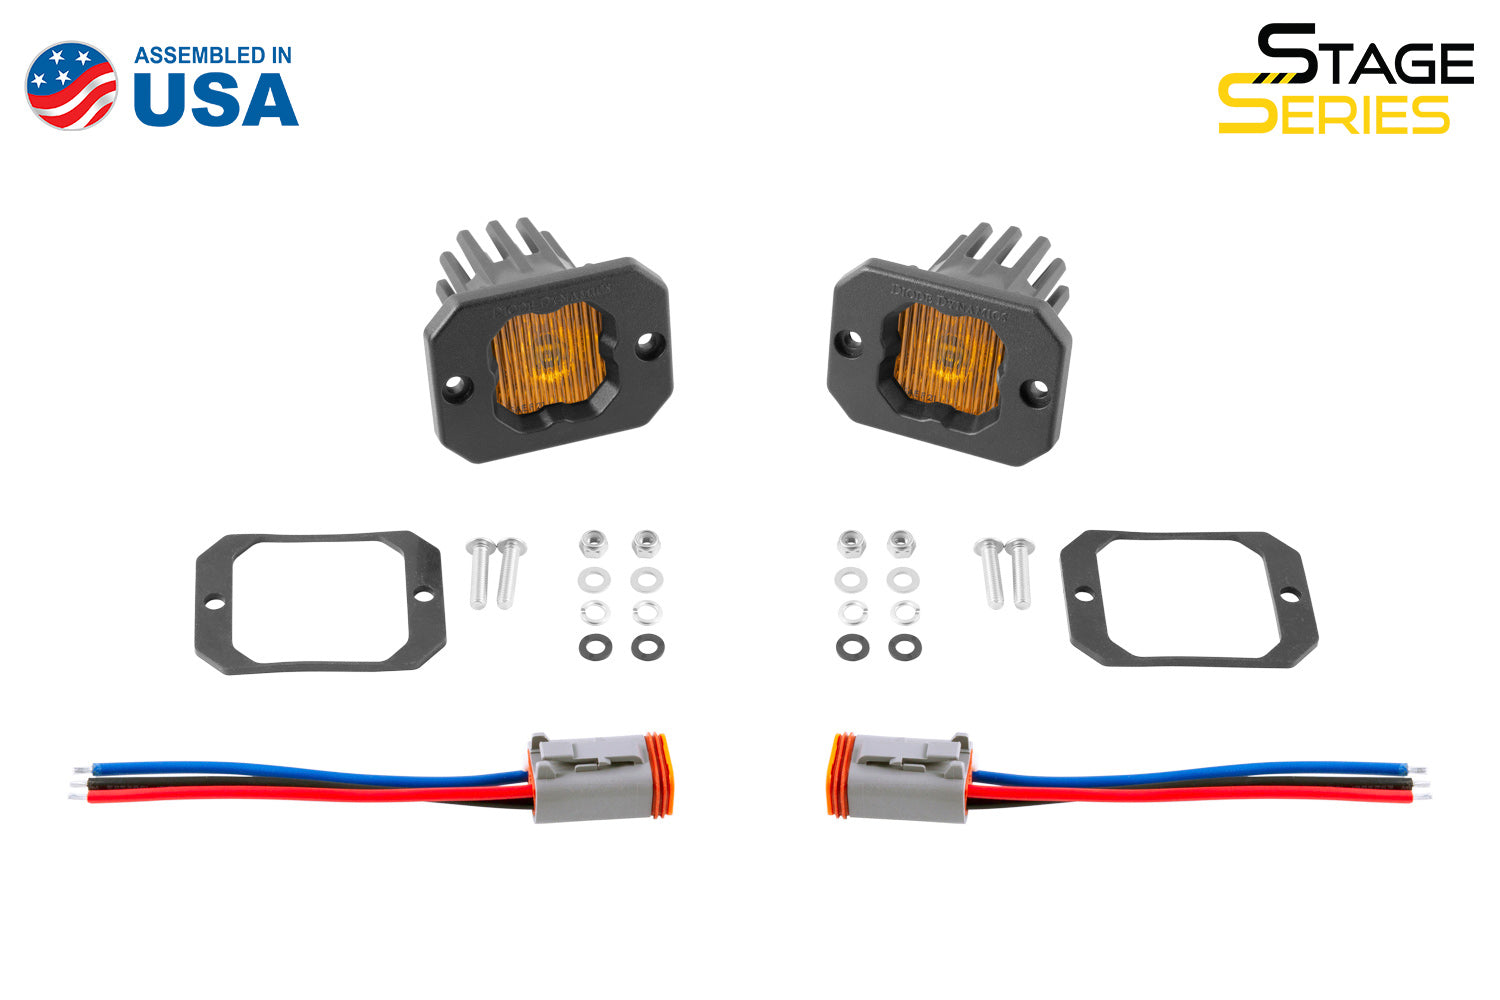 Stage Series C1 LED Pod Sport White Wide Standard ABL Each Diode Dynamics-Offroad Scout